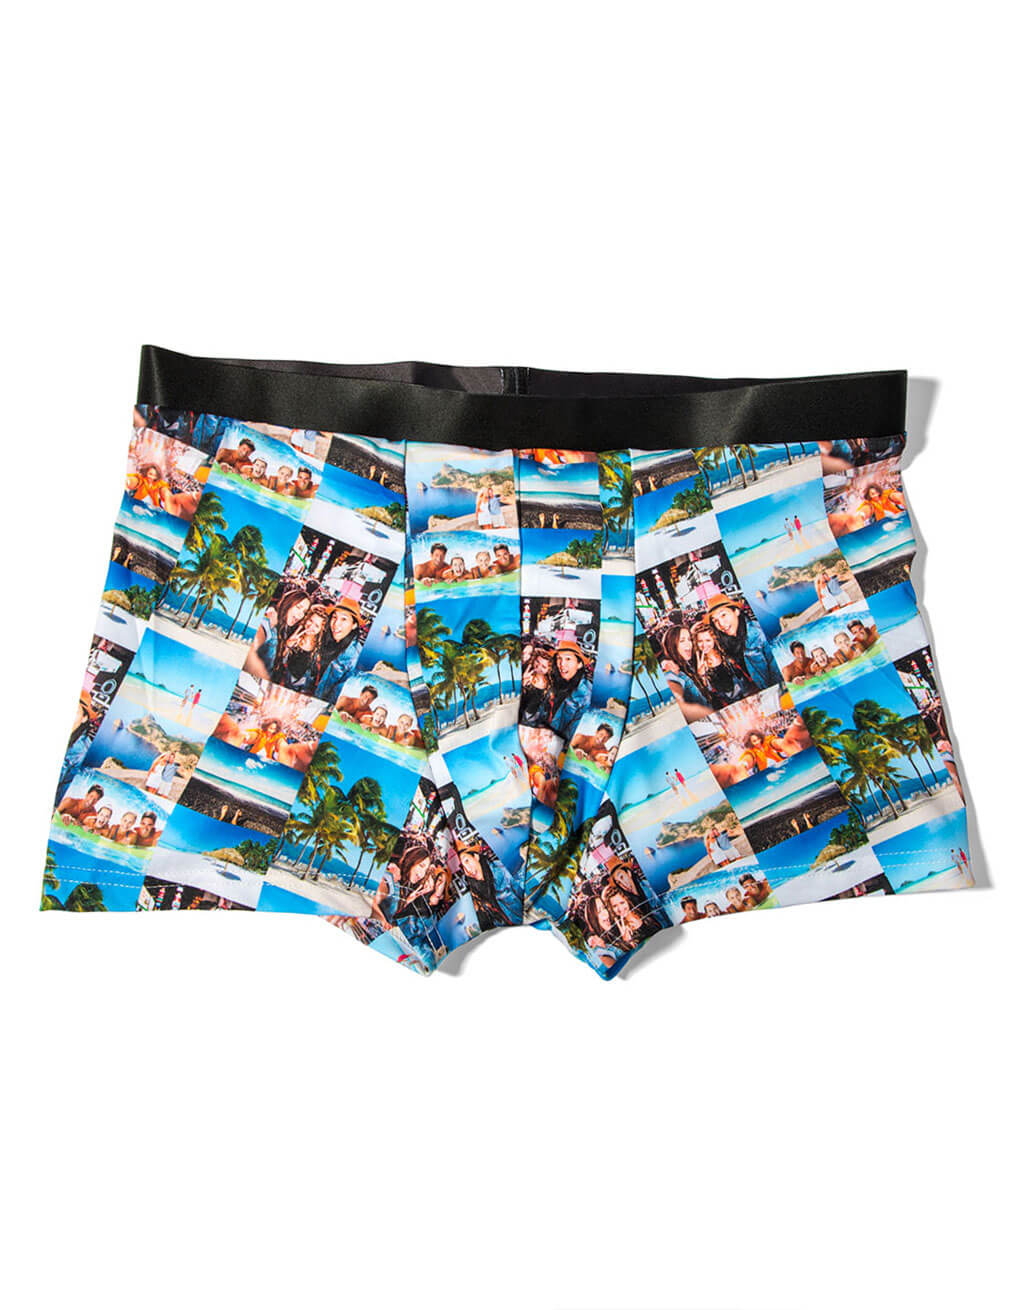 Photo Collage Custom Boxers - Personalized Boxers – Super Socks